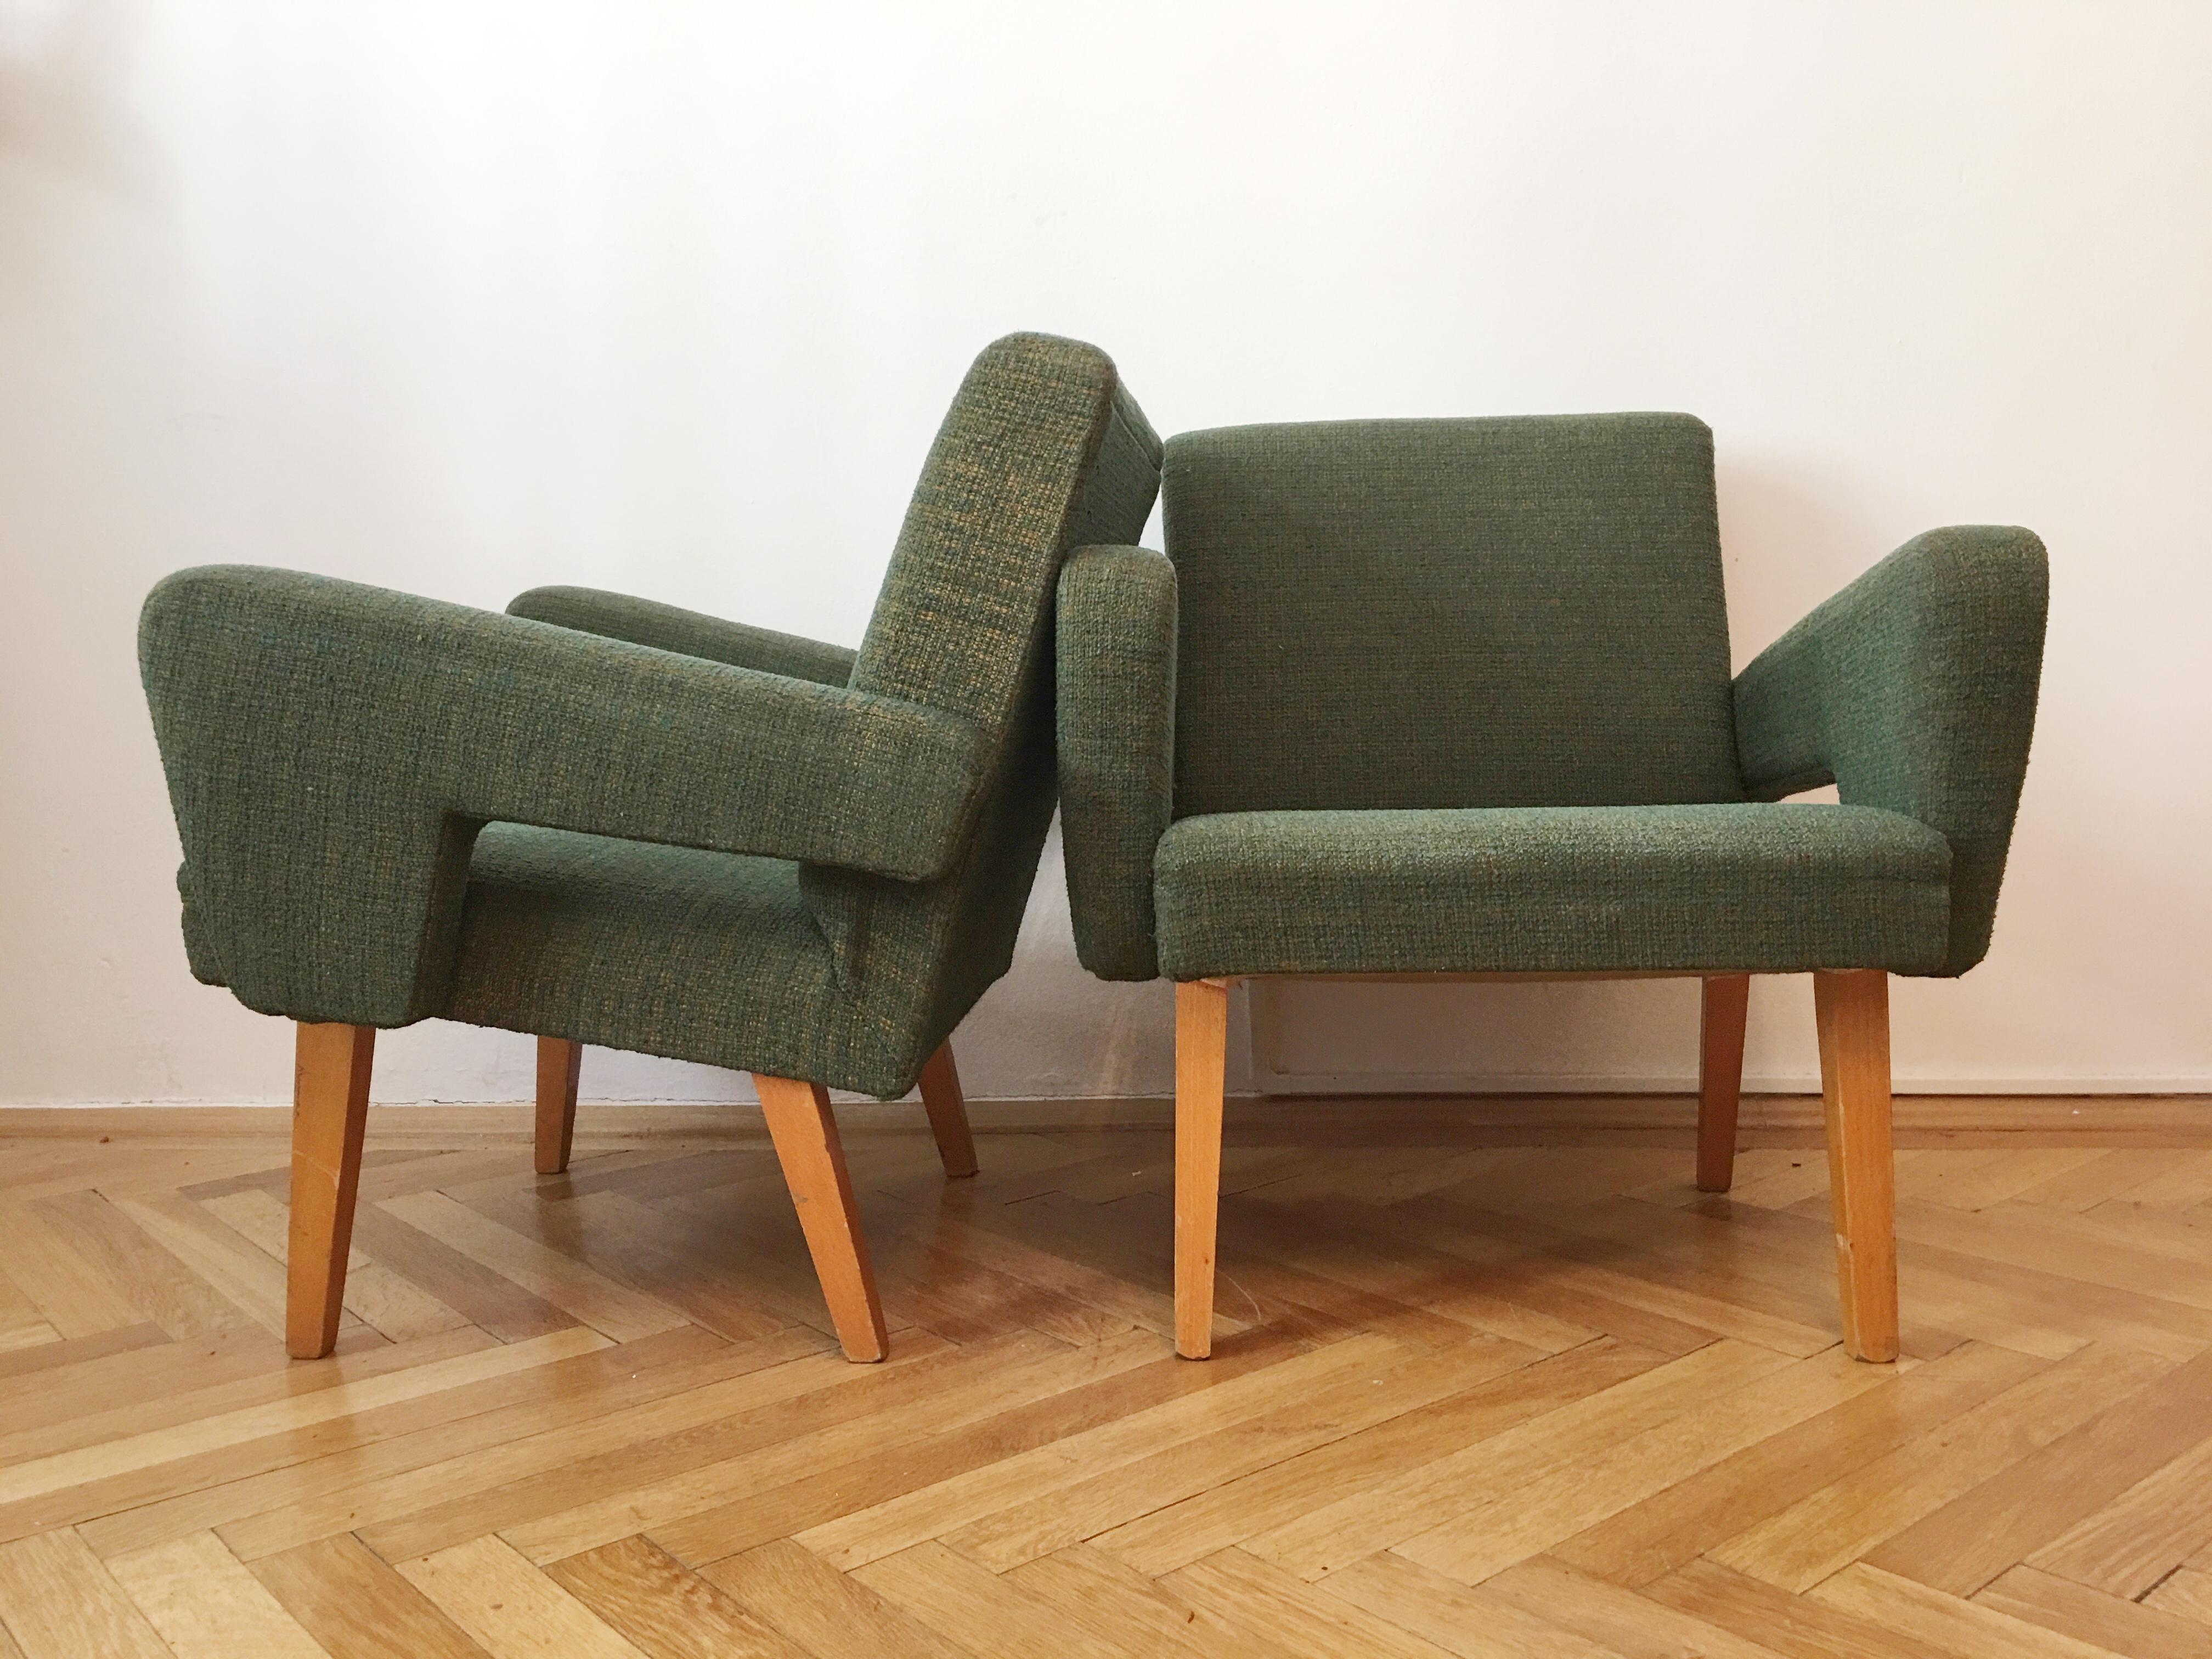 Green Vintage Rocket Armchairs by Jitona, 1960s, Pair For Sale 1